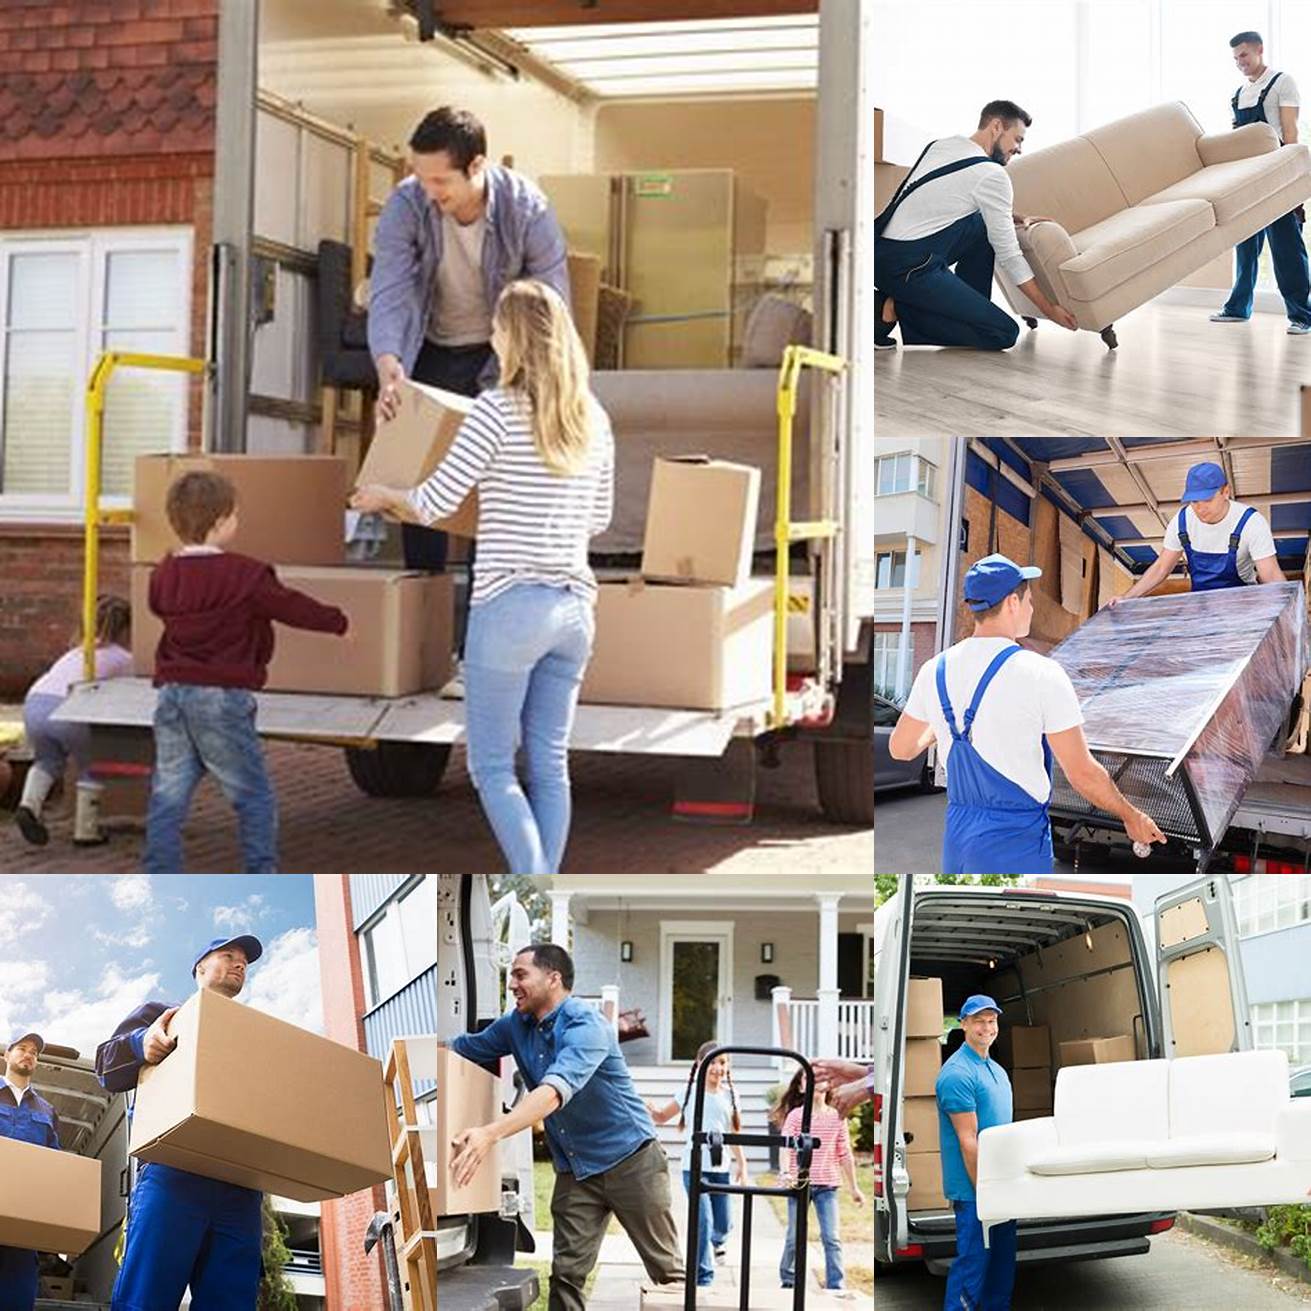 Hire a moving company to transport the furniture